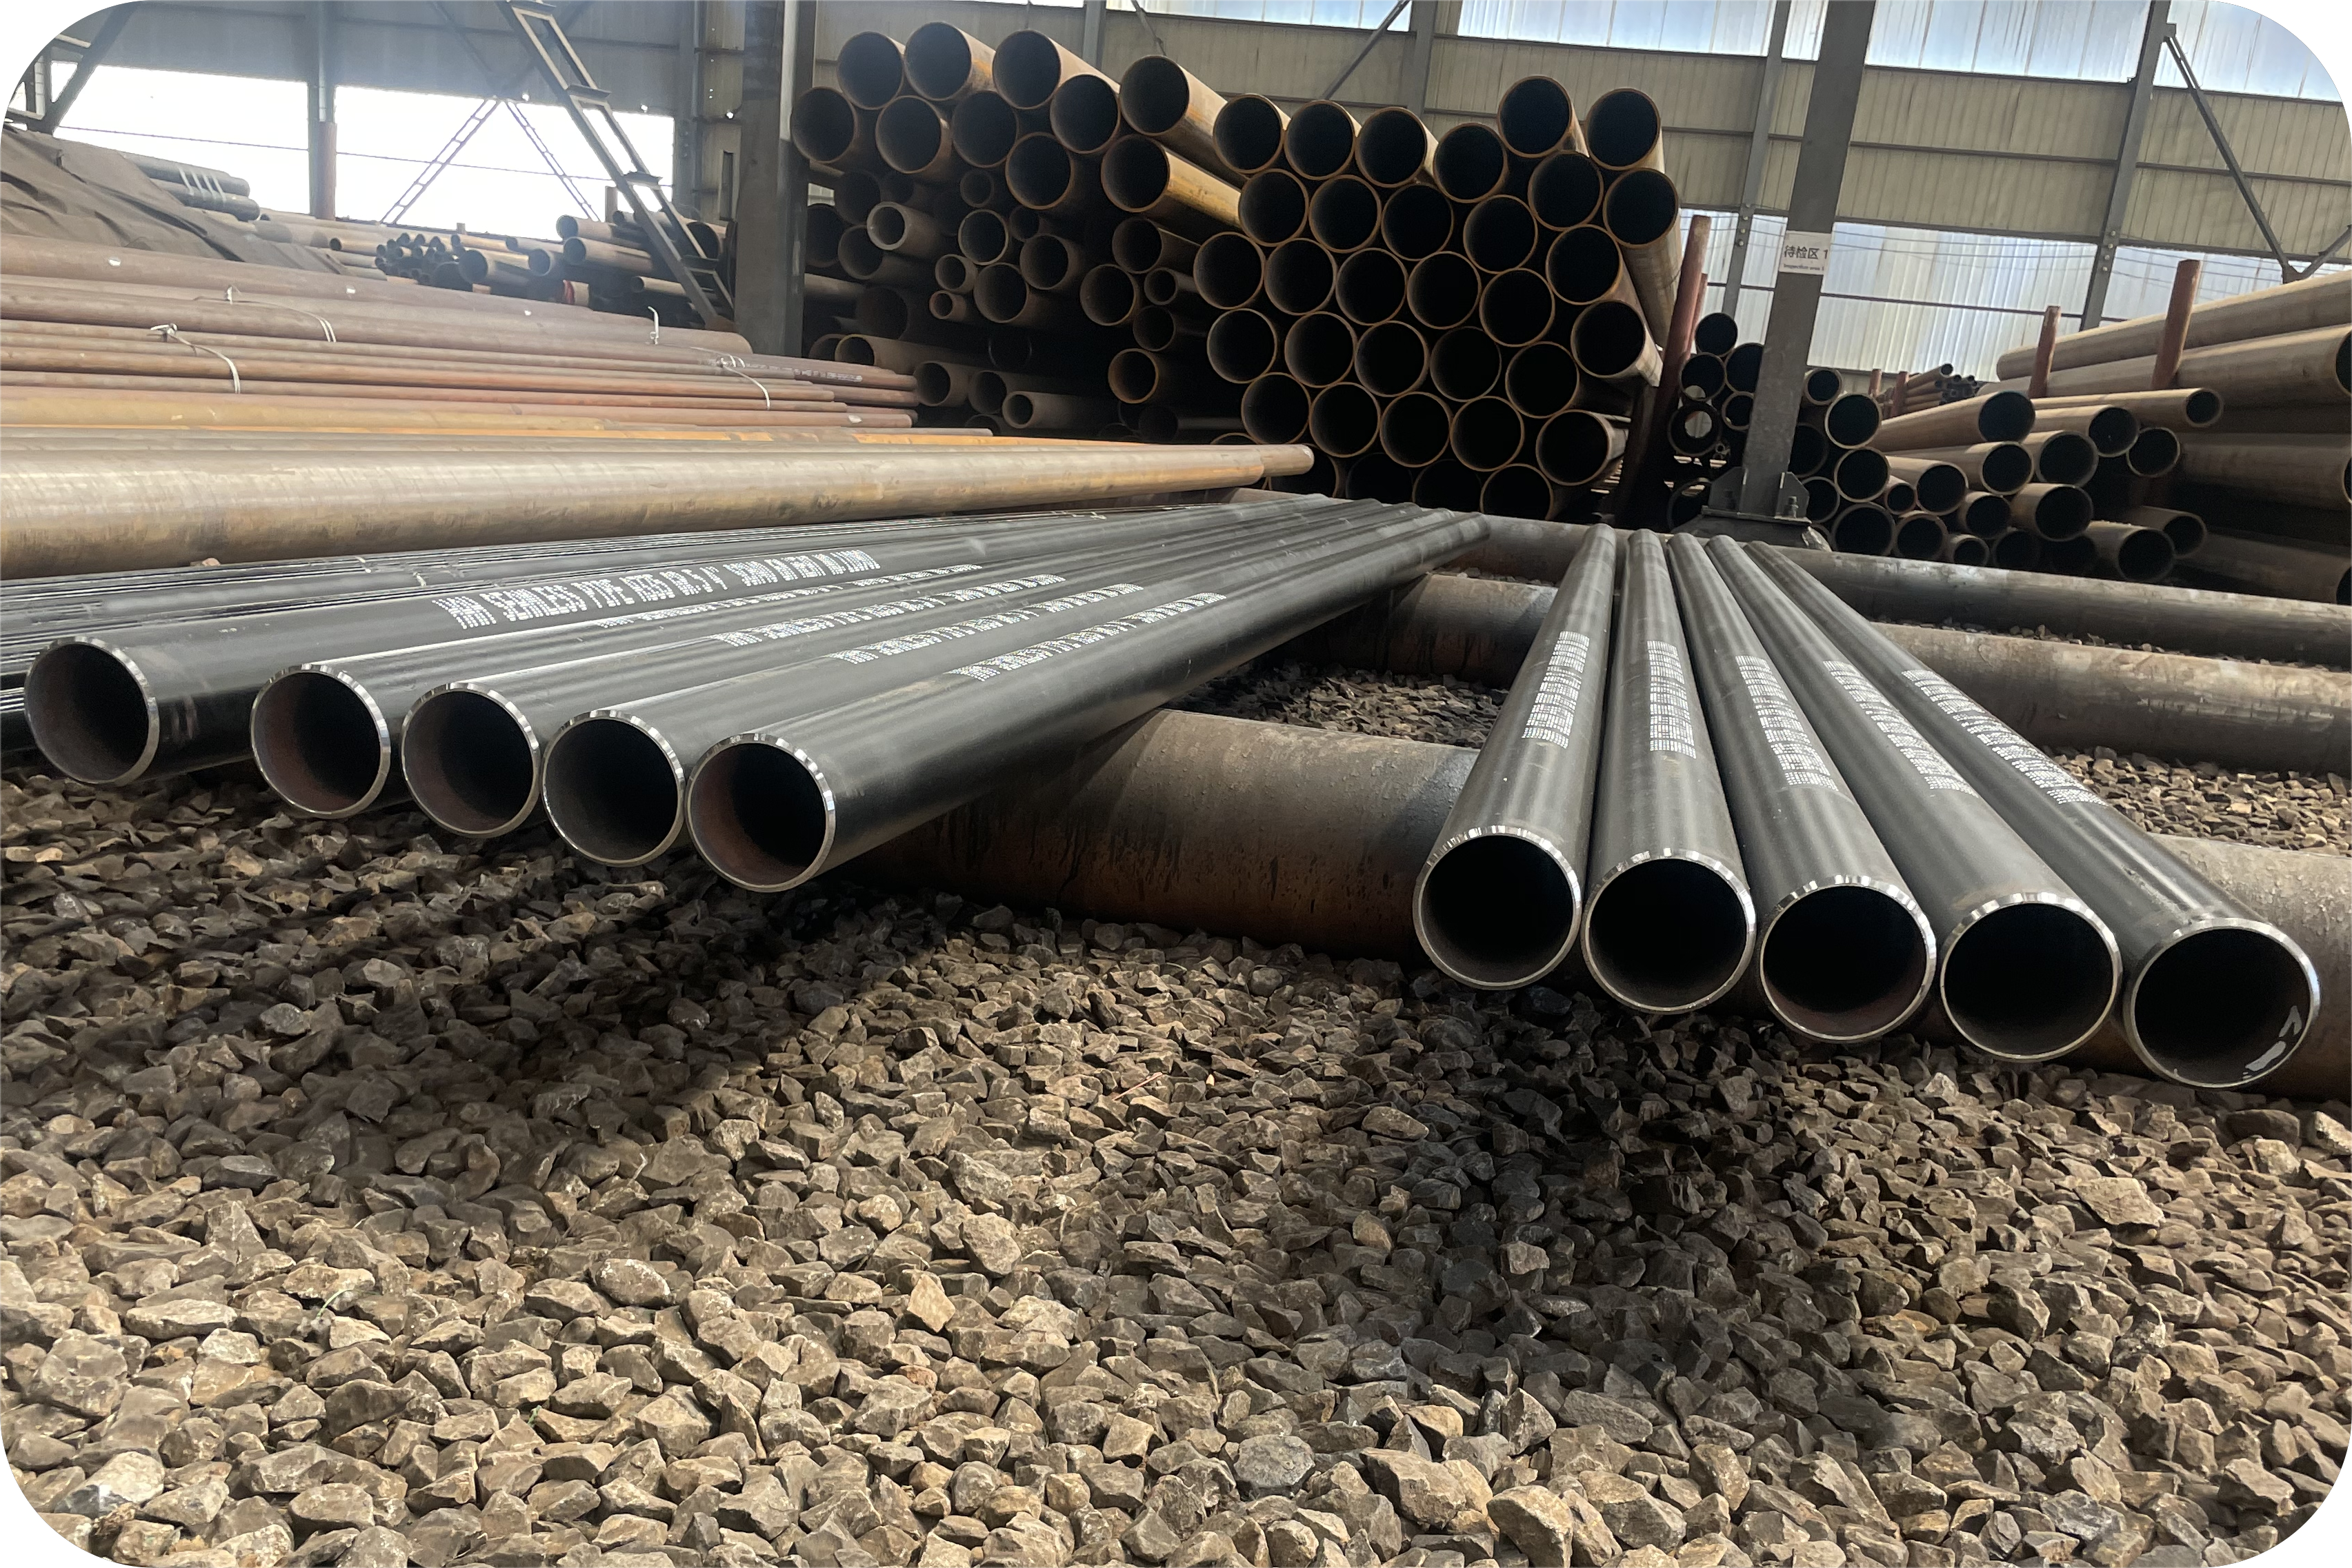 Second shipment of pipes to India